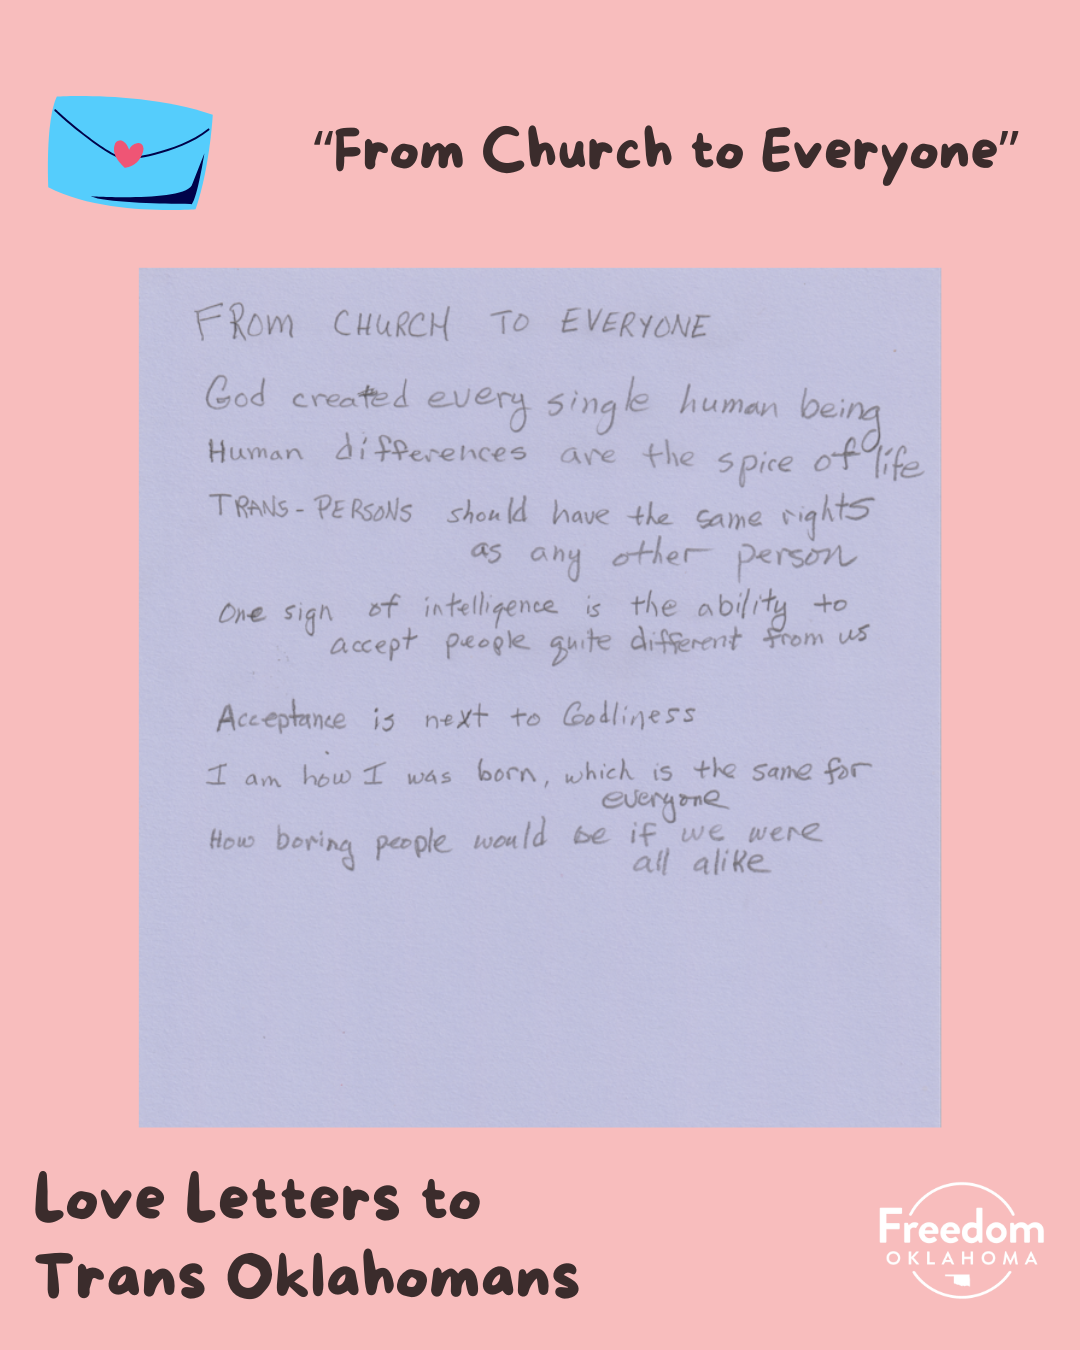  Similar pink graphic with artwork in the center: A handwritten letter on purple paper that reads "From Church to Everyone. God created every single human being / Human differences are the spice of life / Trans - Persons should have the same rights a